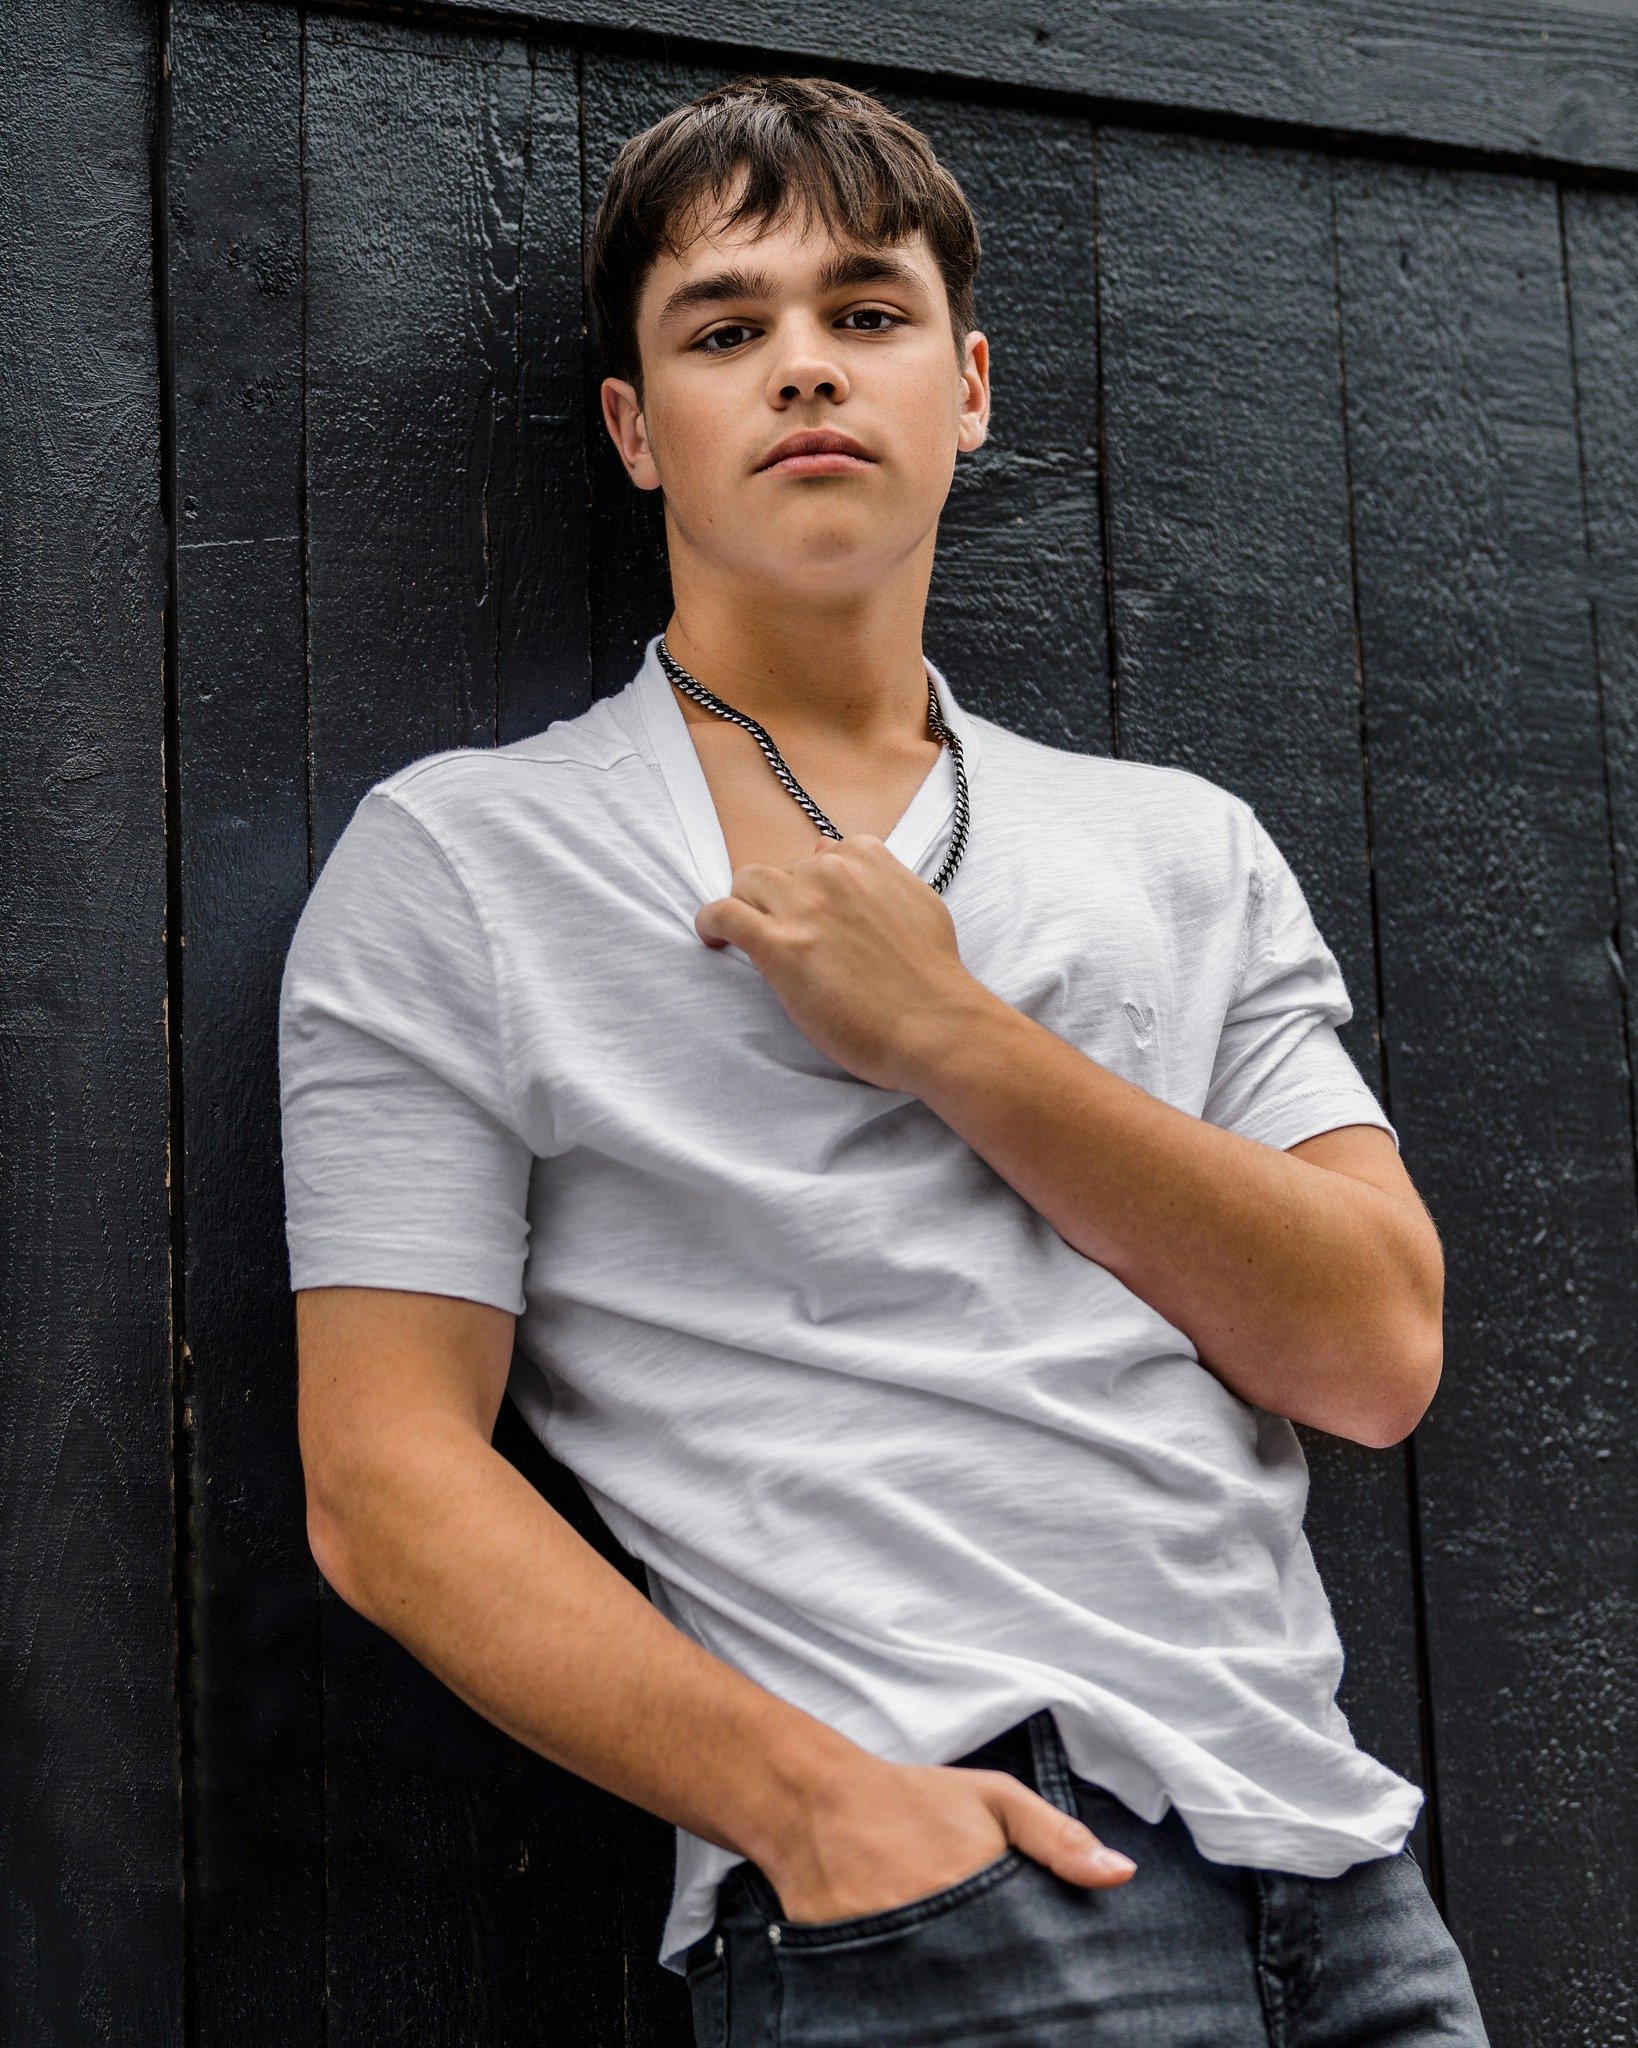 Worthy of the front cover of GQ, Jackson brought his A-game to his Senior Pictures 🤩

#studiobseniors #studiobguys #studiobportraits #issaquahphotographer #bellevuephotographer